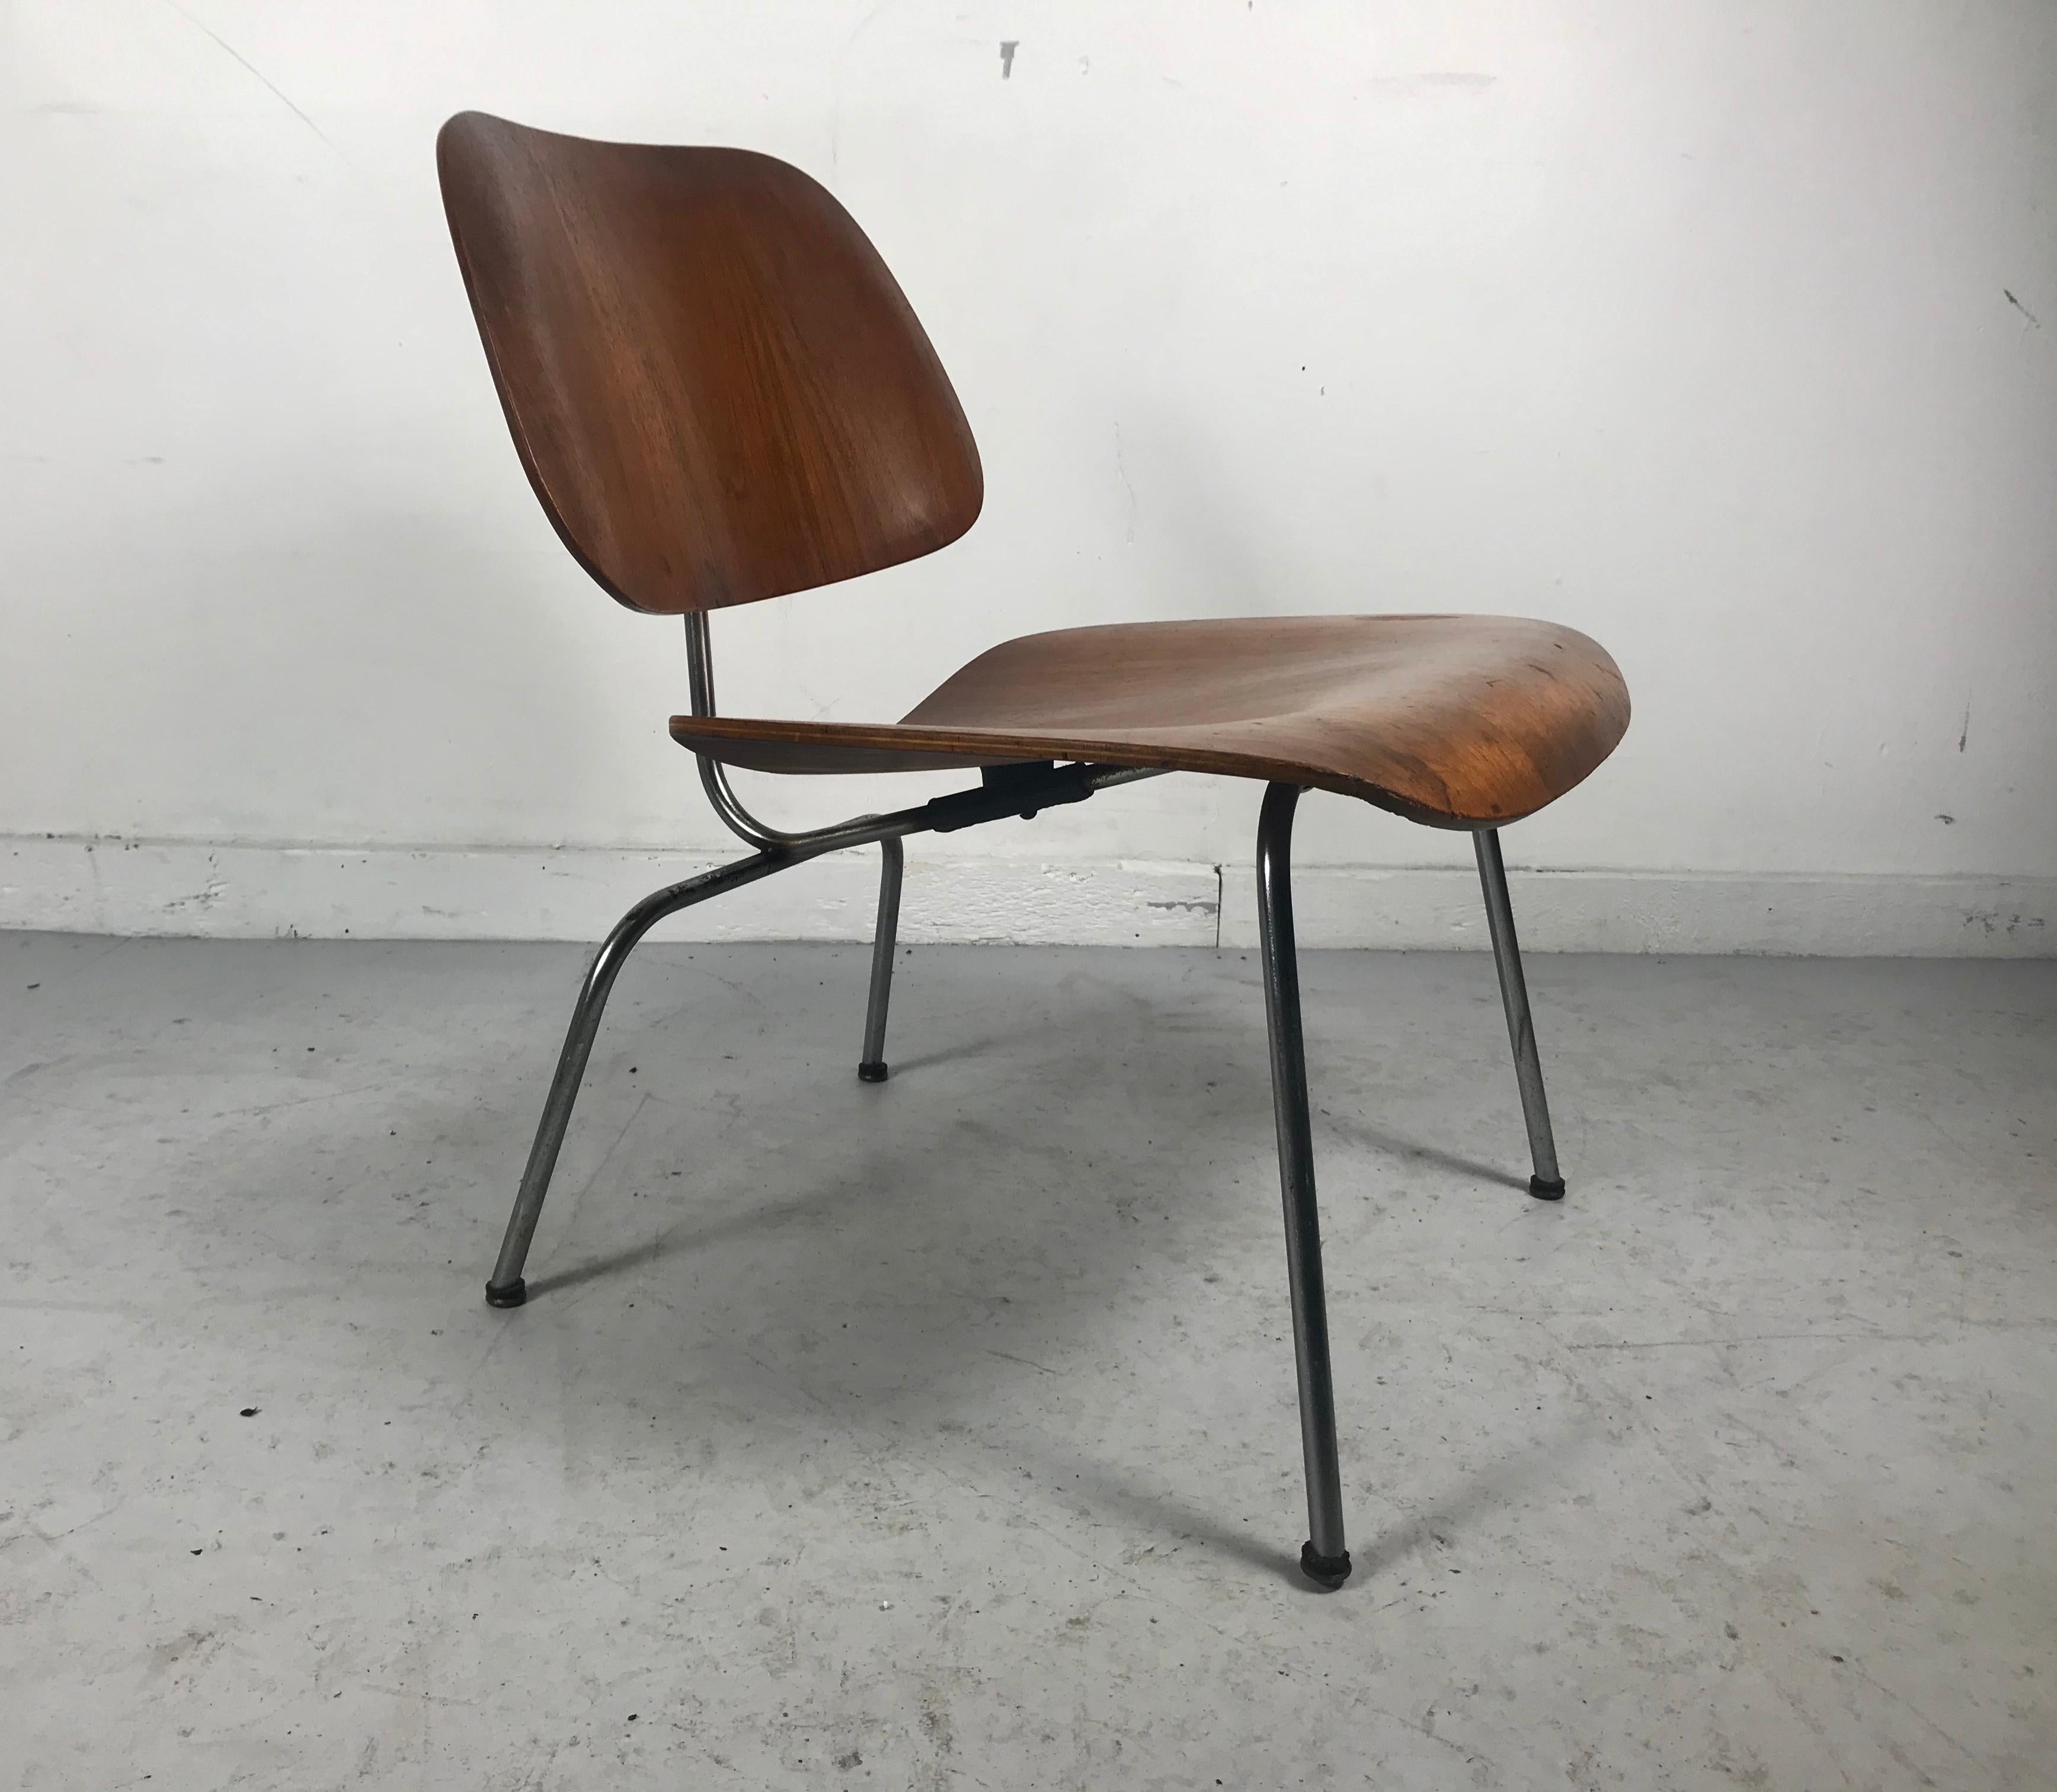 Mid-Century Modern Early Production Charles Eames LCM 'Lounge Chair Metal', Original Label